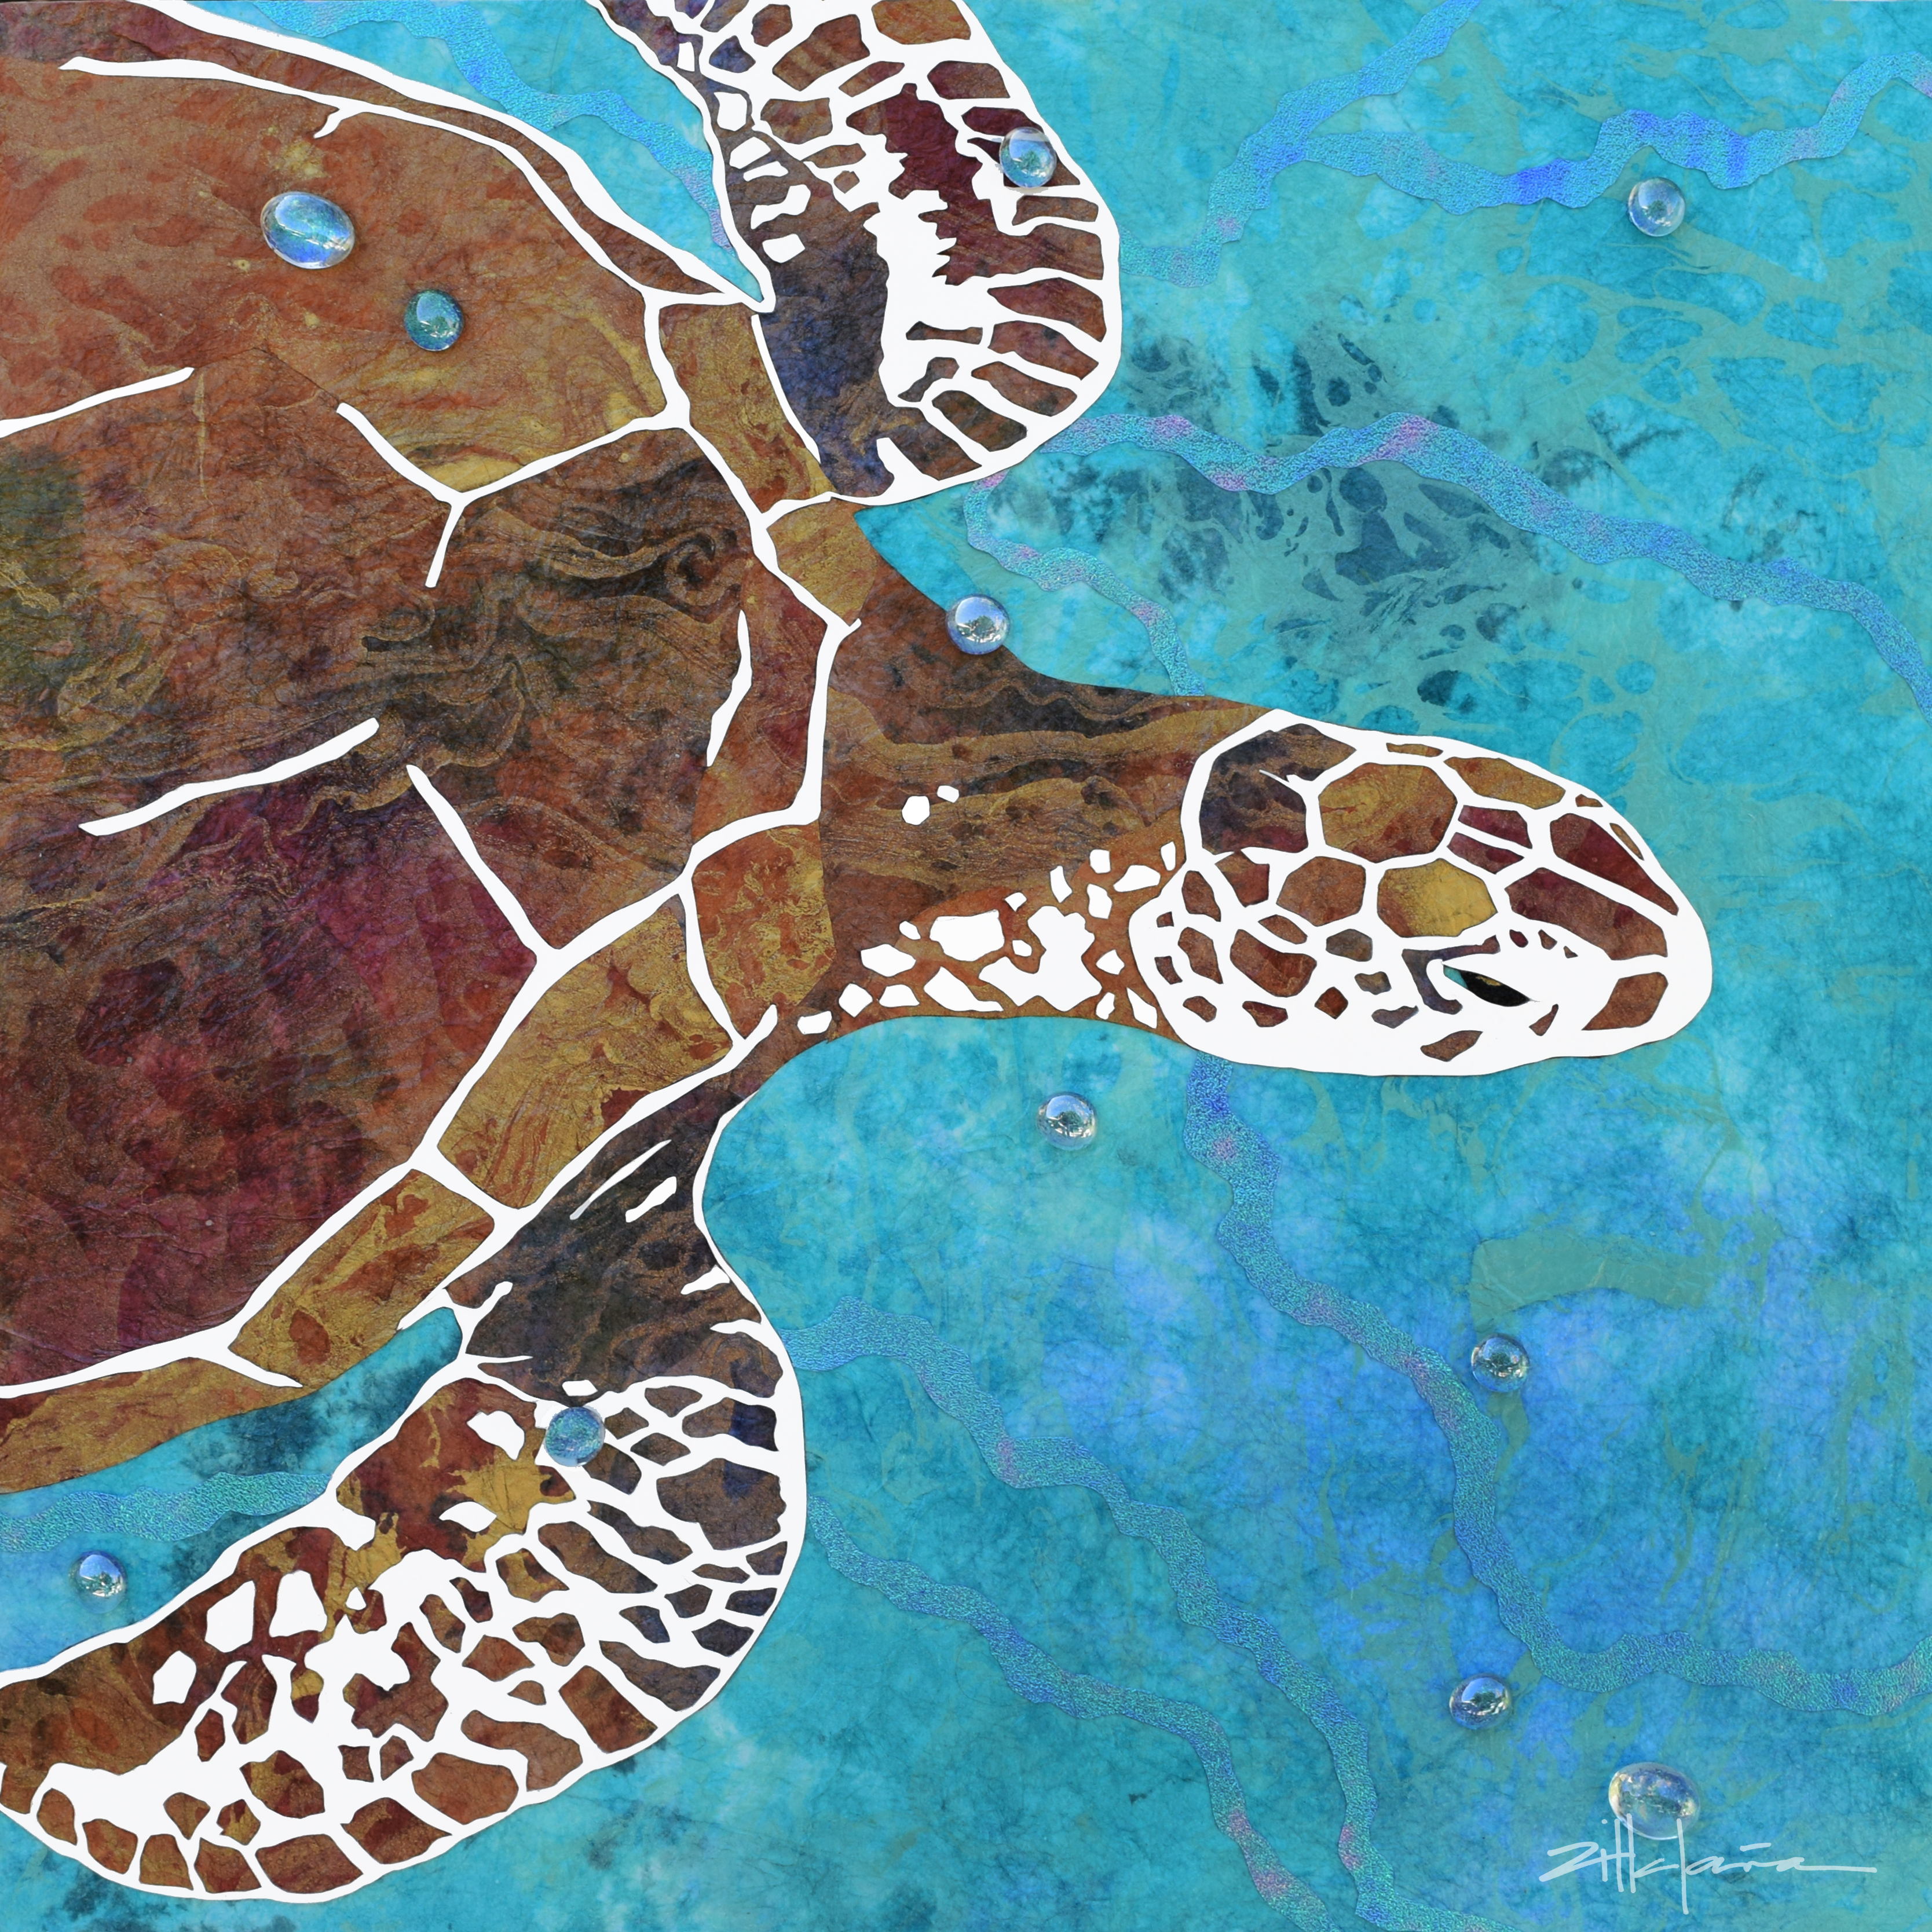 Danza de las Tortugas - Dancing Green Sea Turtles of the Caribbean Oceans - Original fine art by Marcy Ann VIllafana "24 x 24" mixed media - paper on cut paper with inks and glass